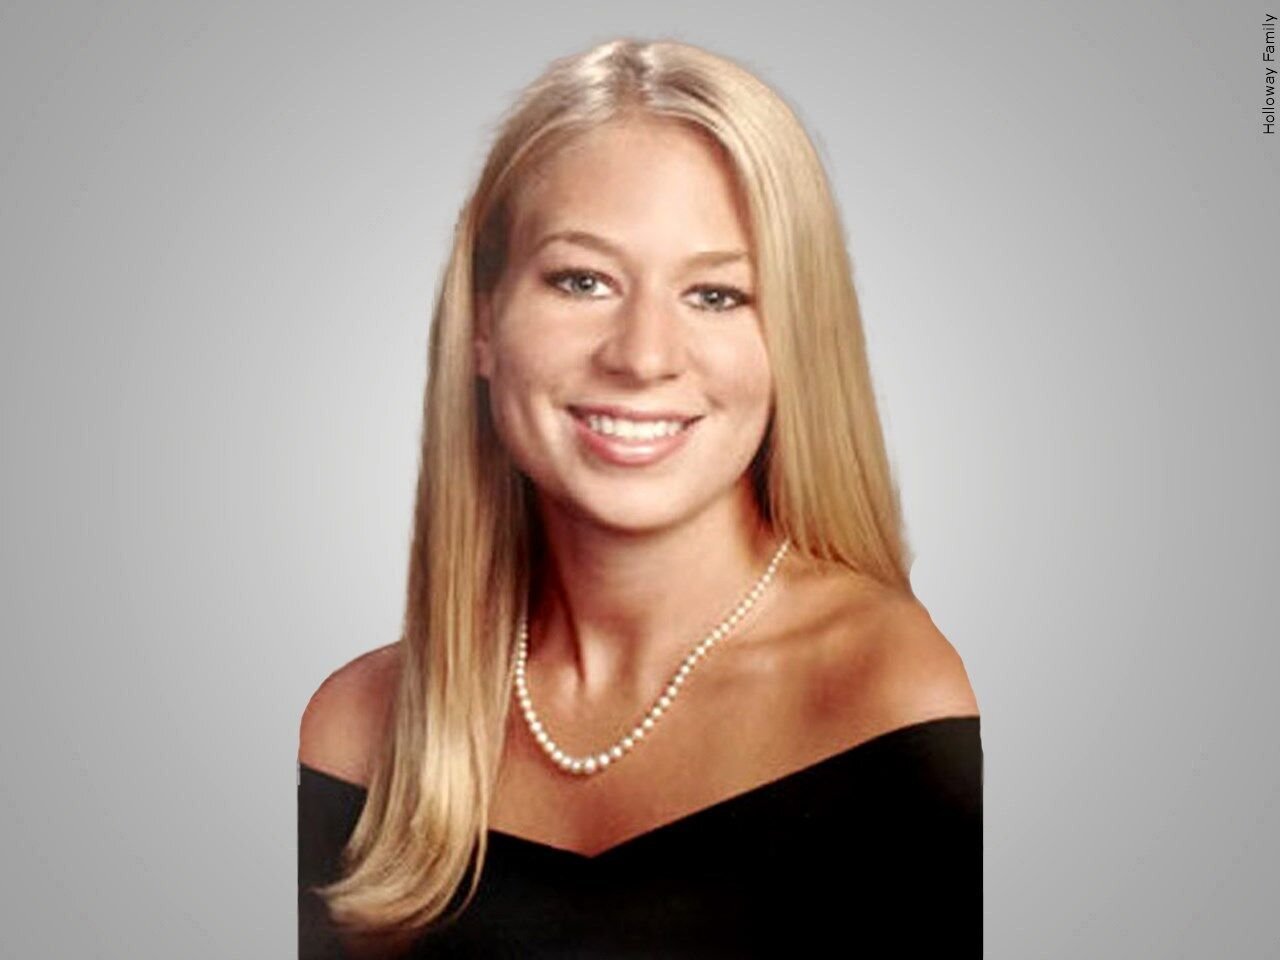 Natalee Holloway Biography: Age, Parents, Net Worth, Boyfriend, Family, Disappearance, Documentary